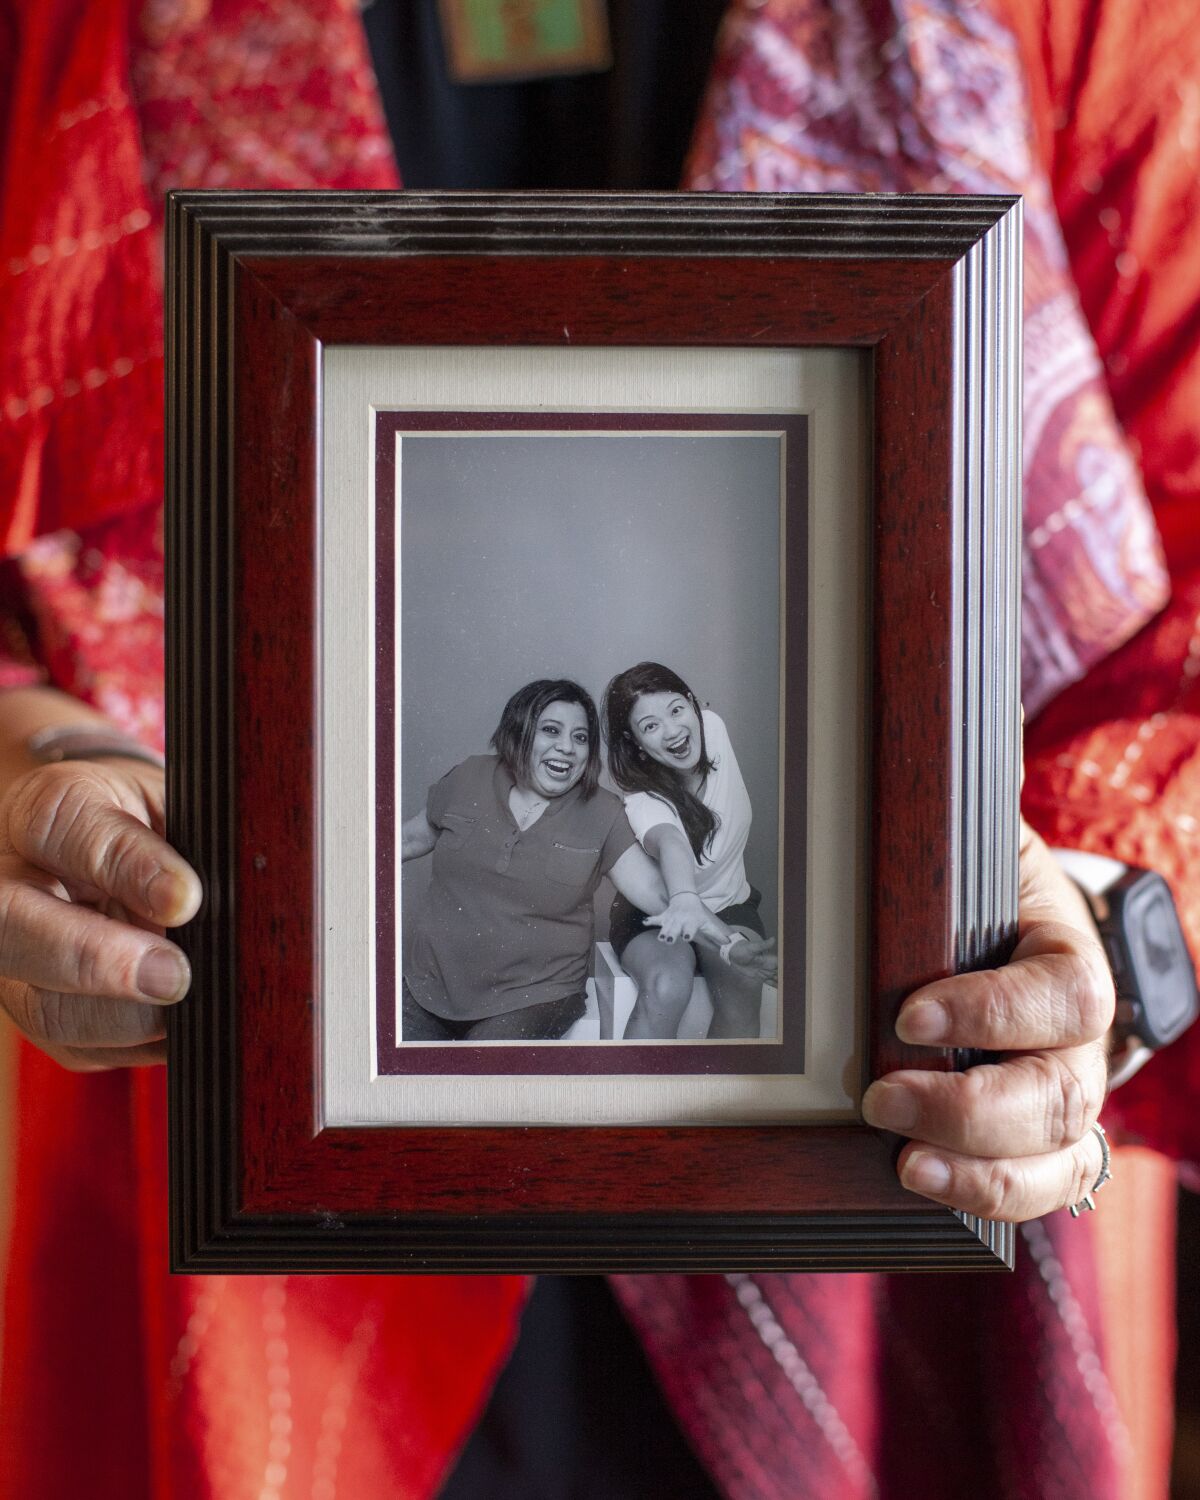 At her home in Seattle, Shila Das holds a picture of herself with her best friend, Wendy Chua.